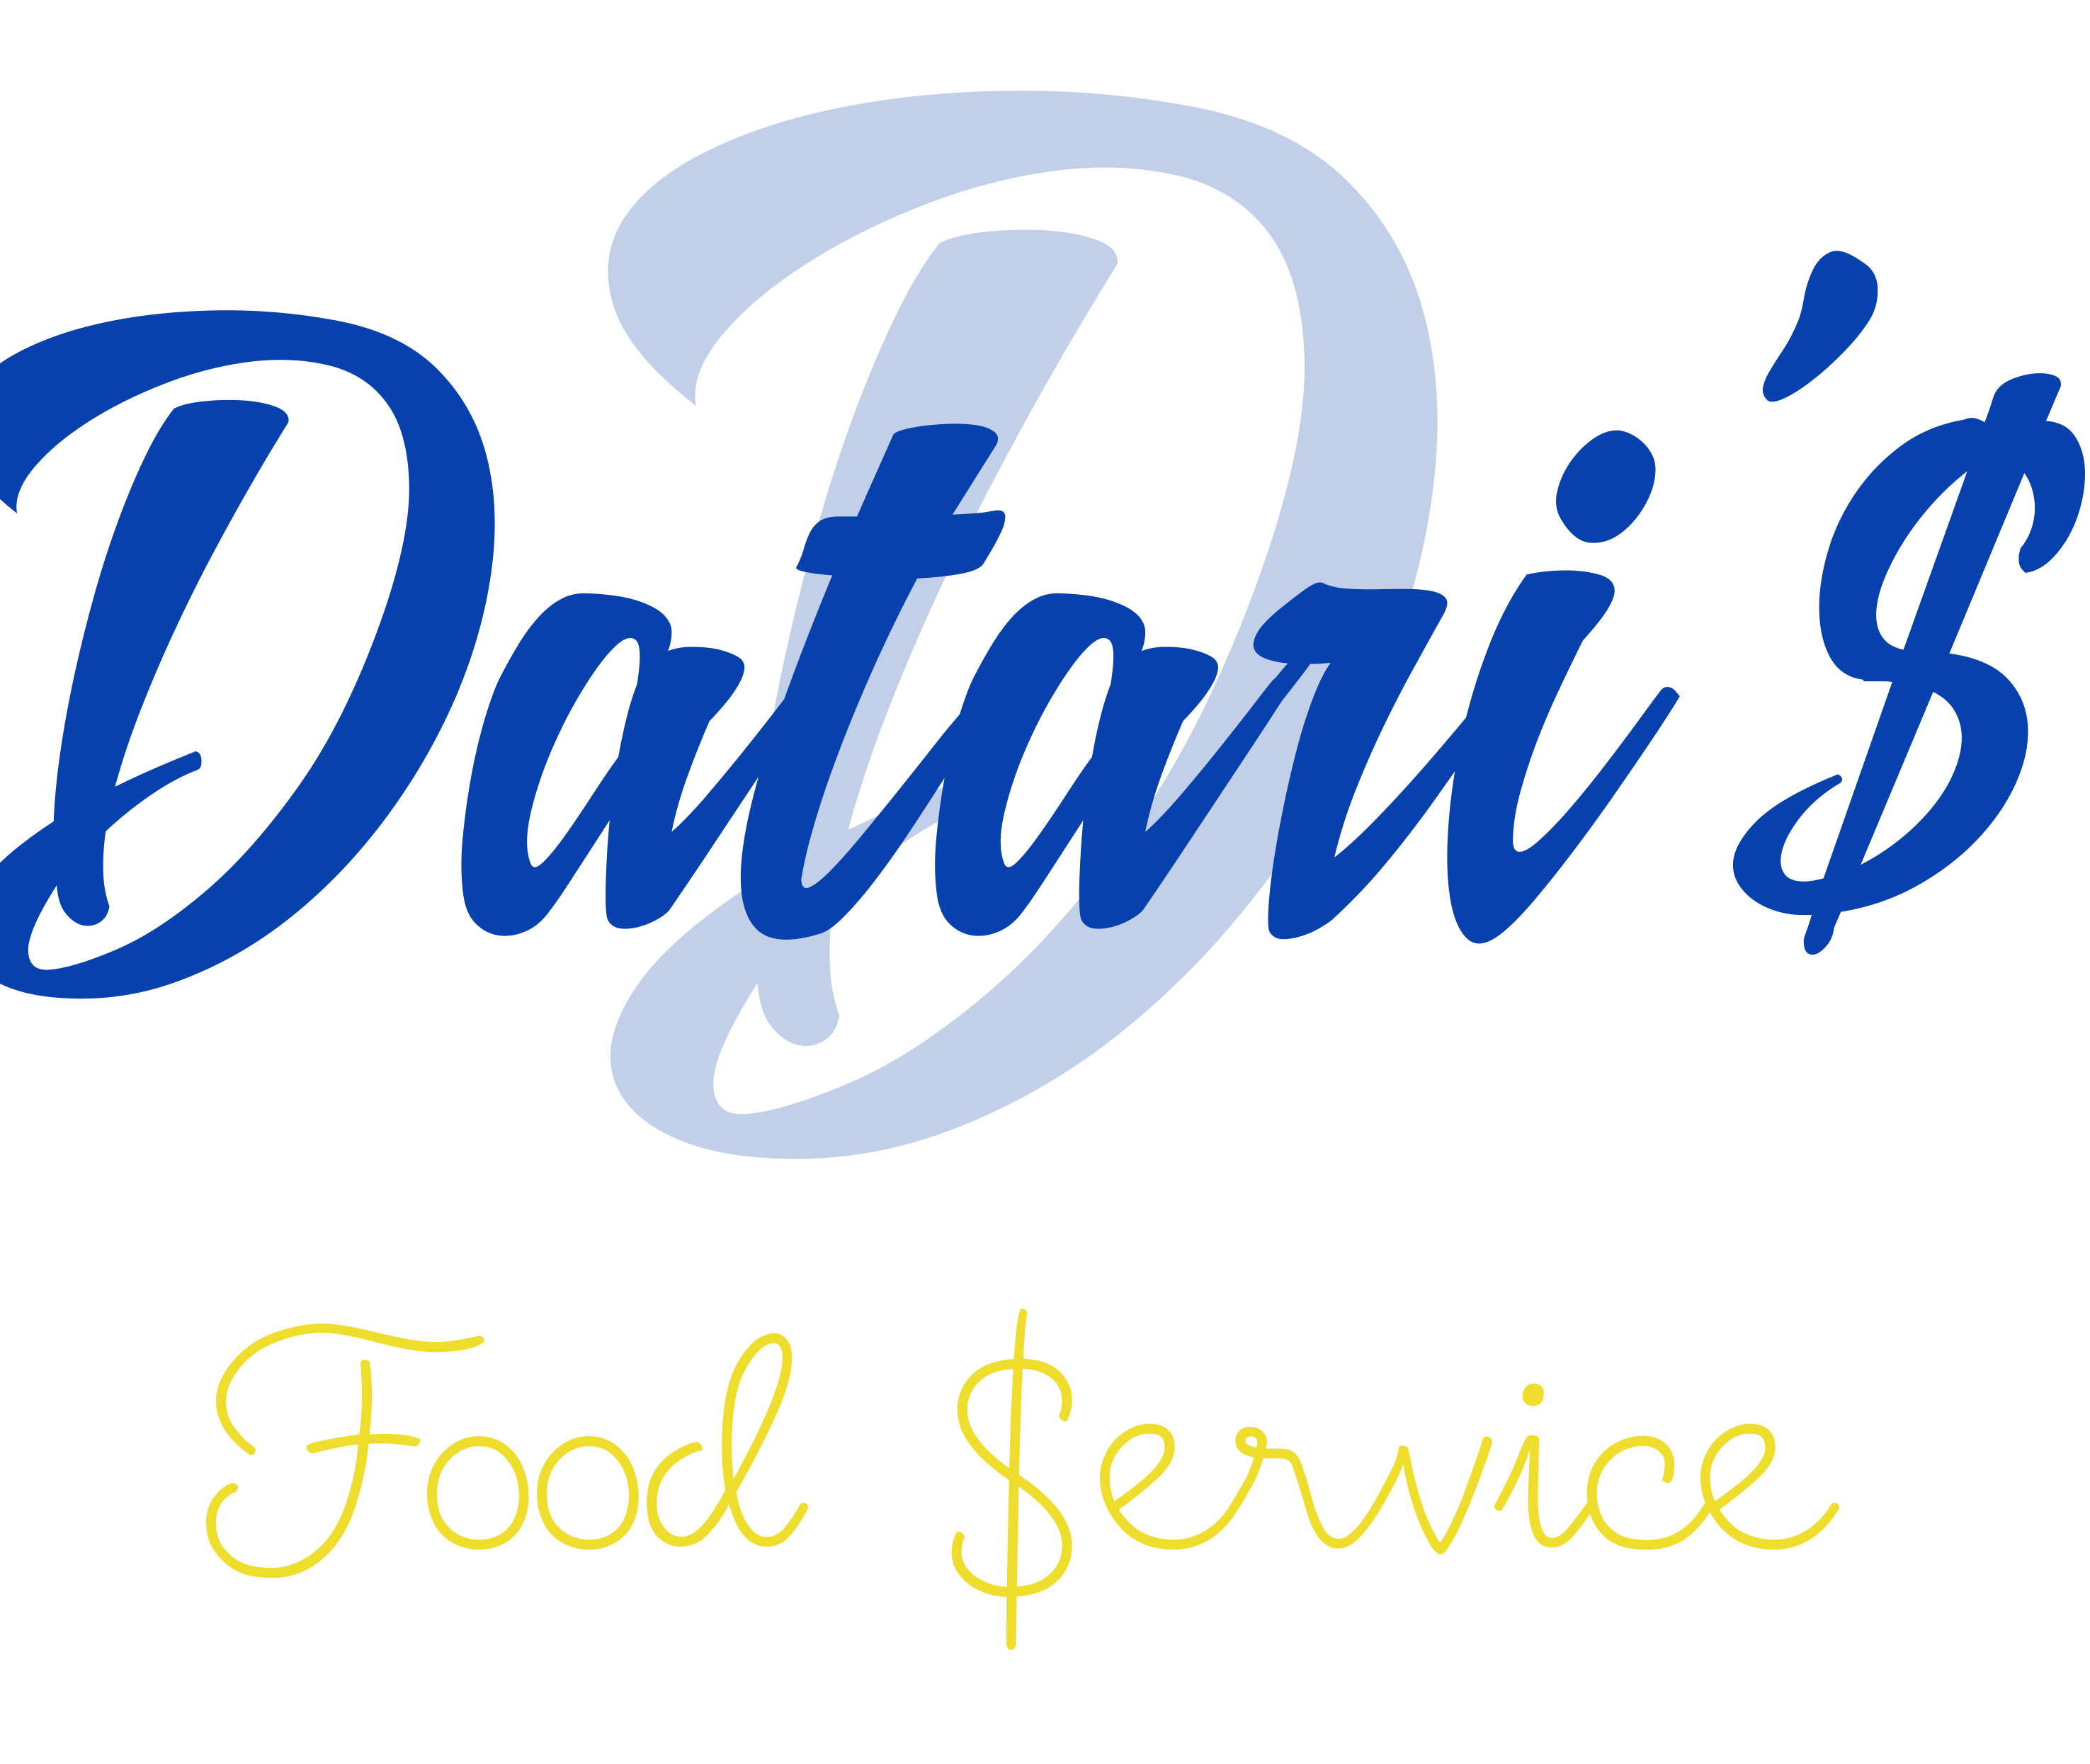 The logo or business face of "Datari's private chef & food service llc"